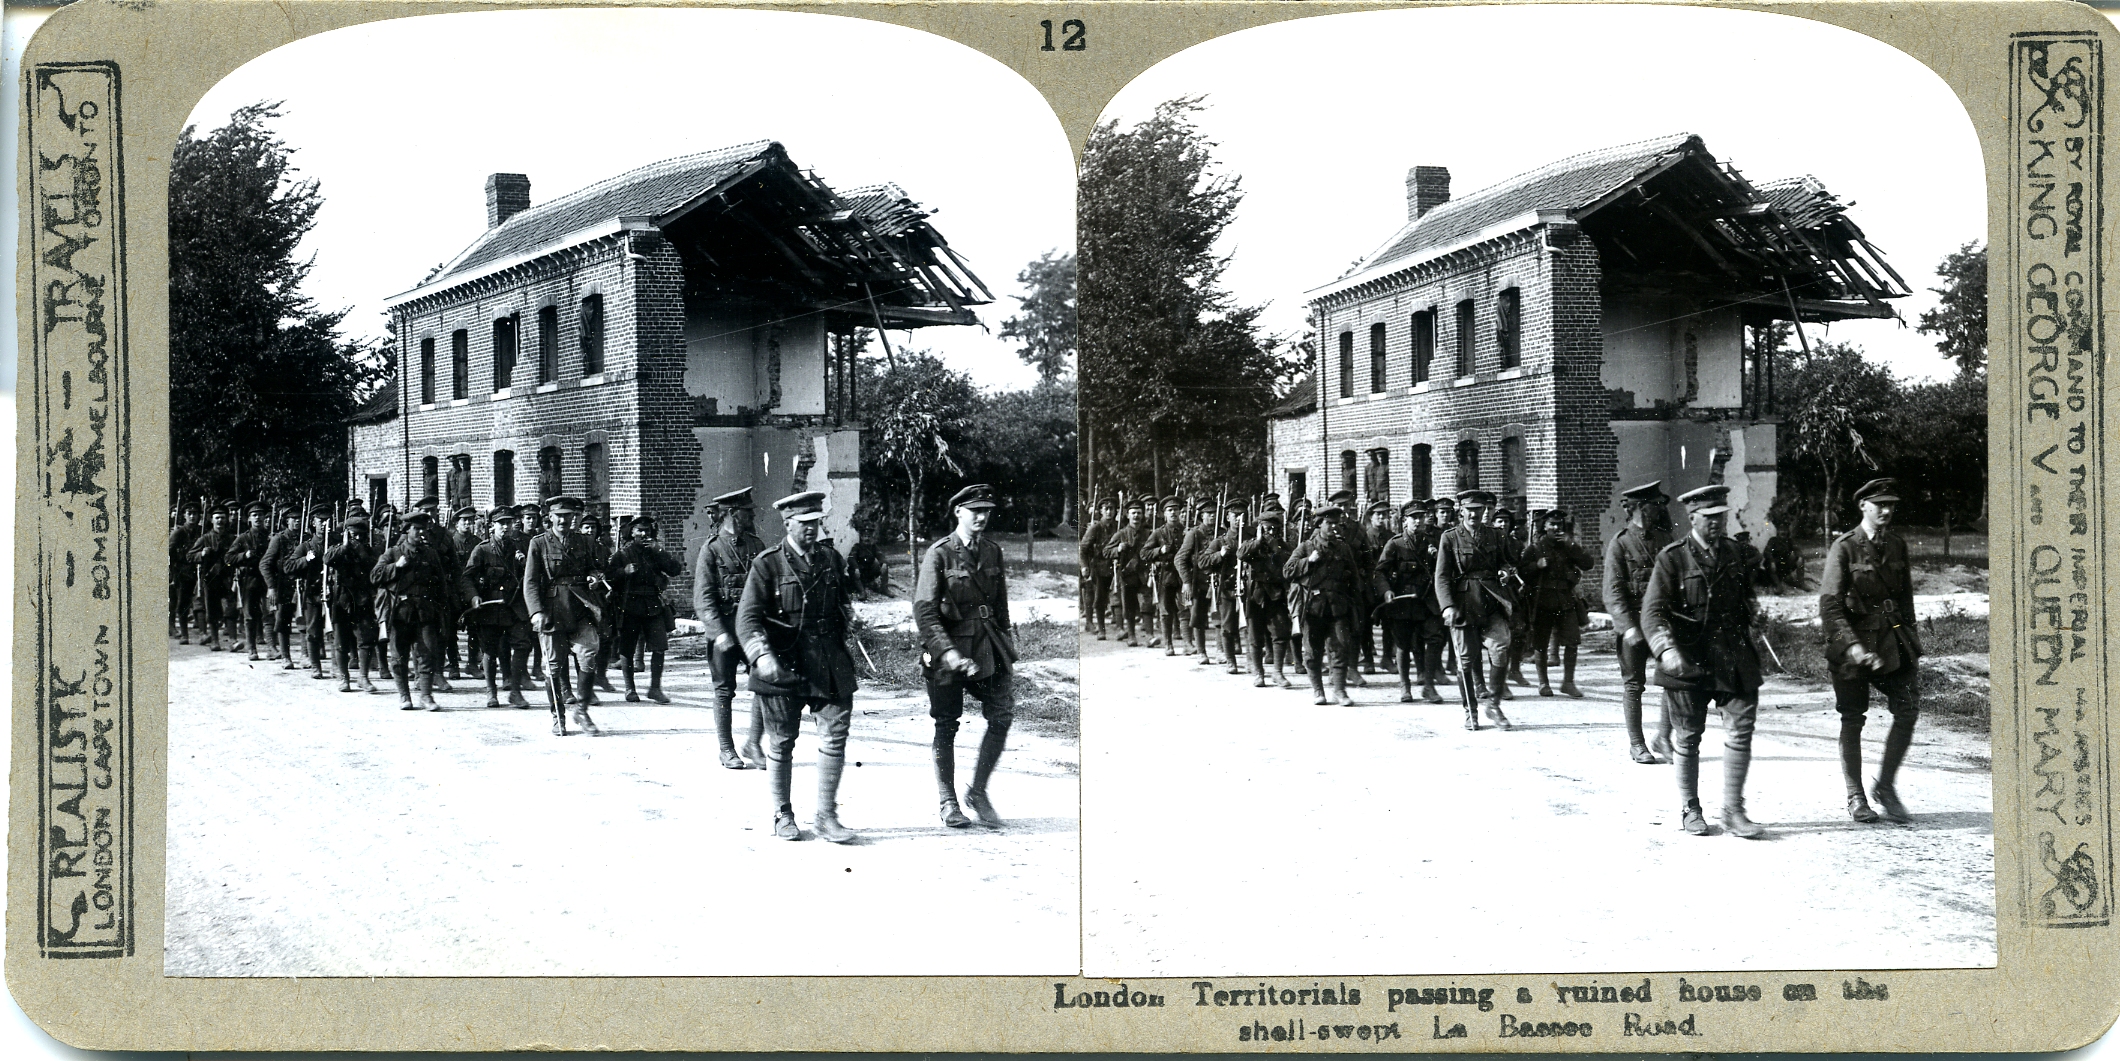 London Territorials pass the wrecked Doll's house on the shell-swept La Brassee (sic) road